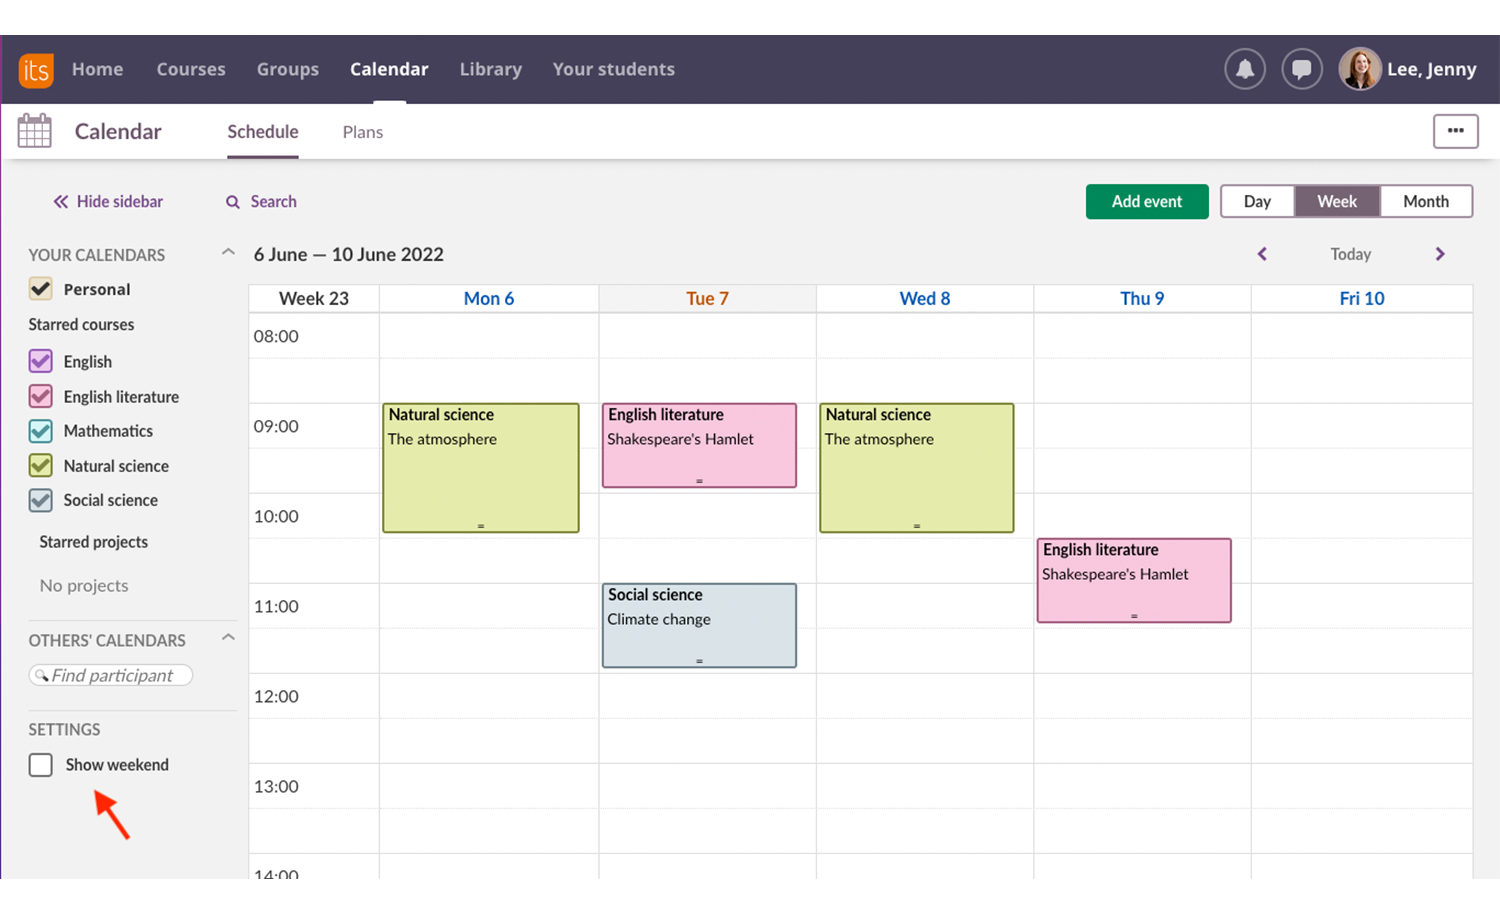 Calendar: The calendar shows plans, tasks and homework and has a seamless integration with the planner and activities.